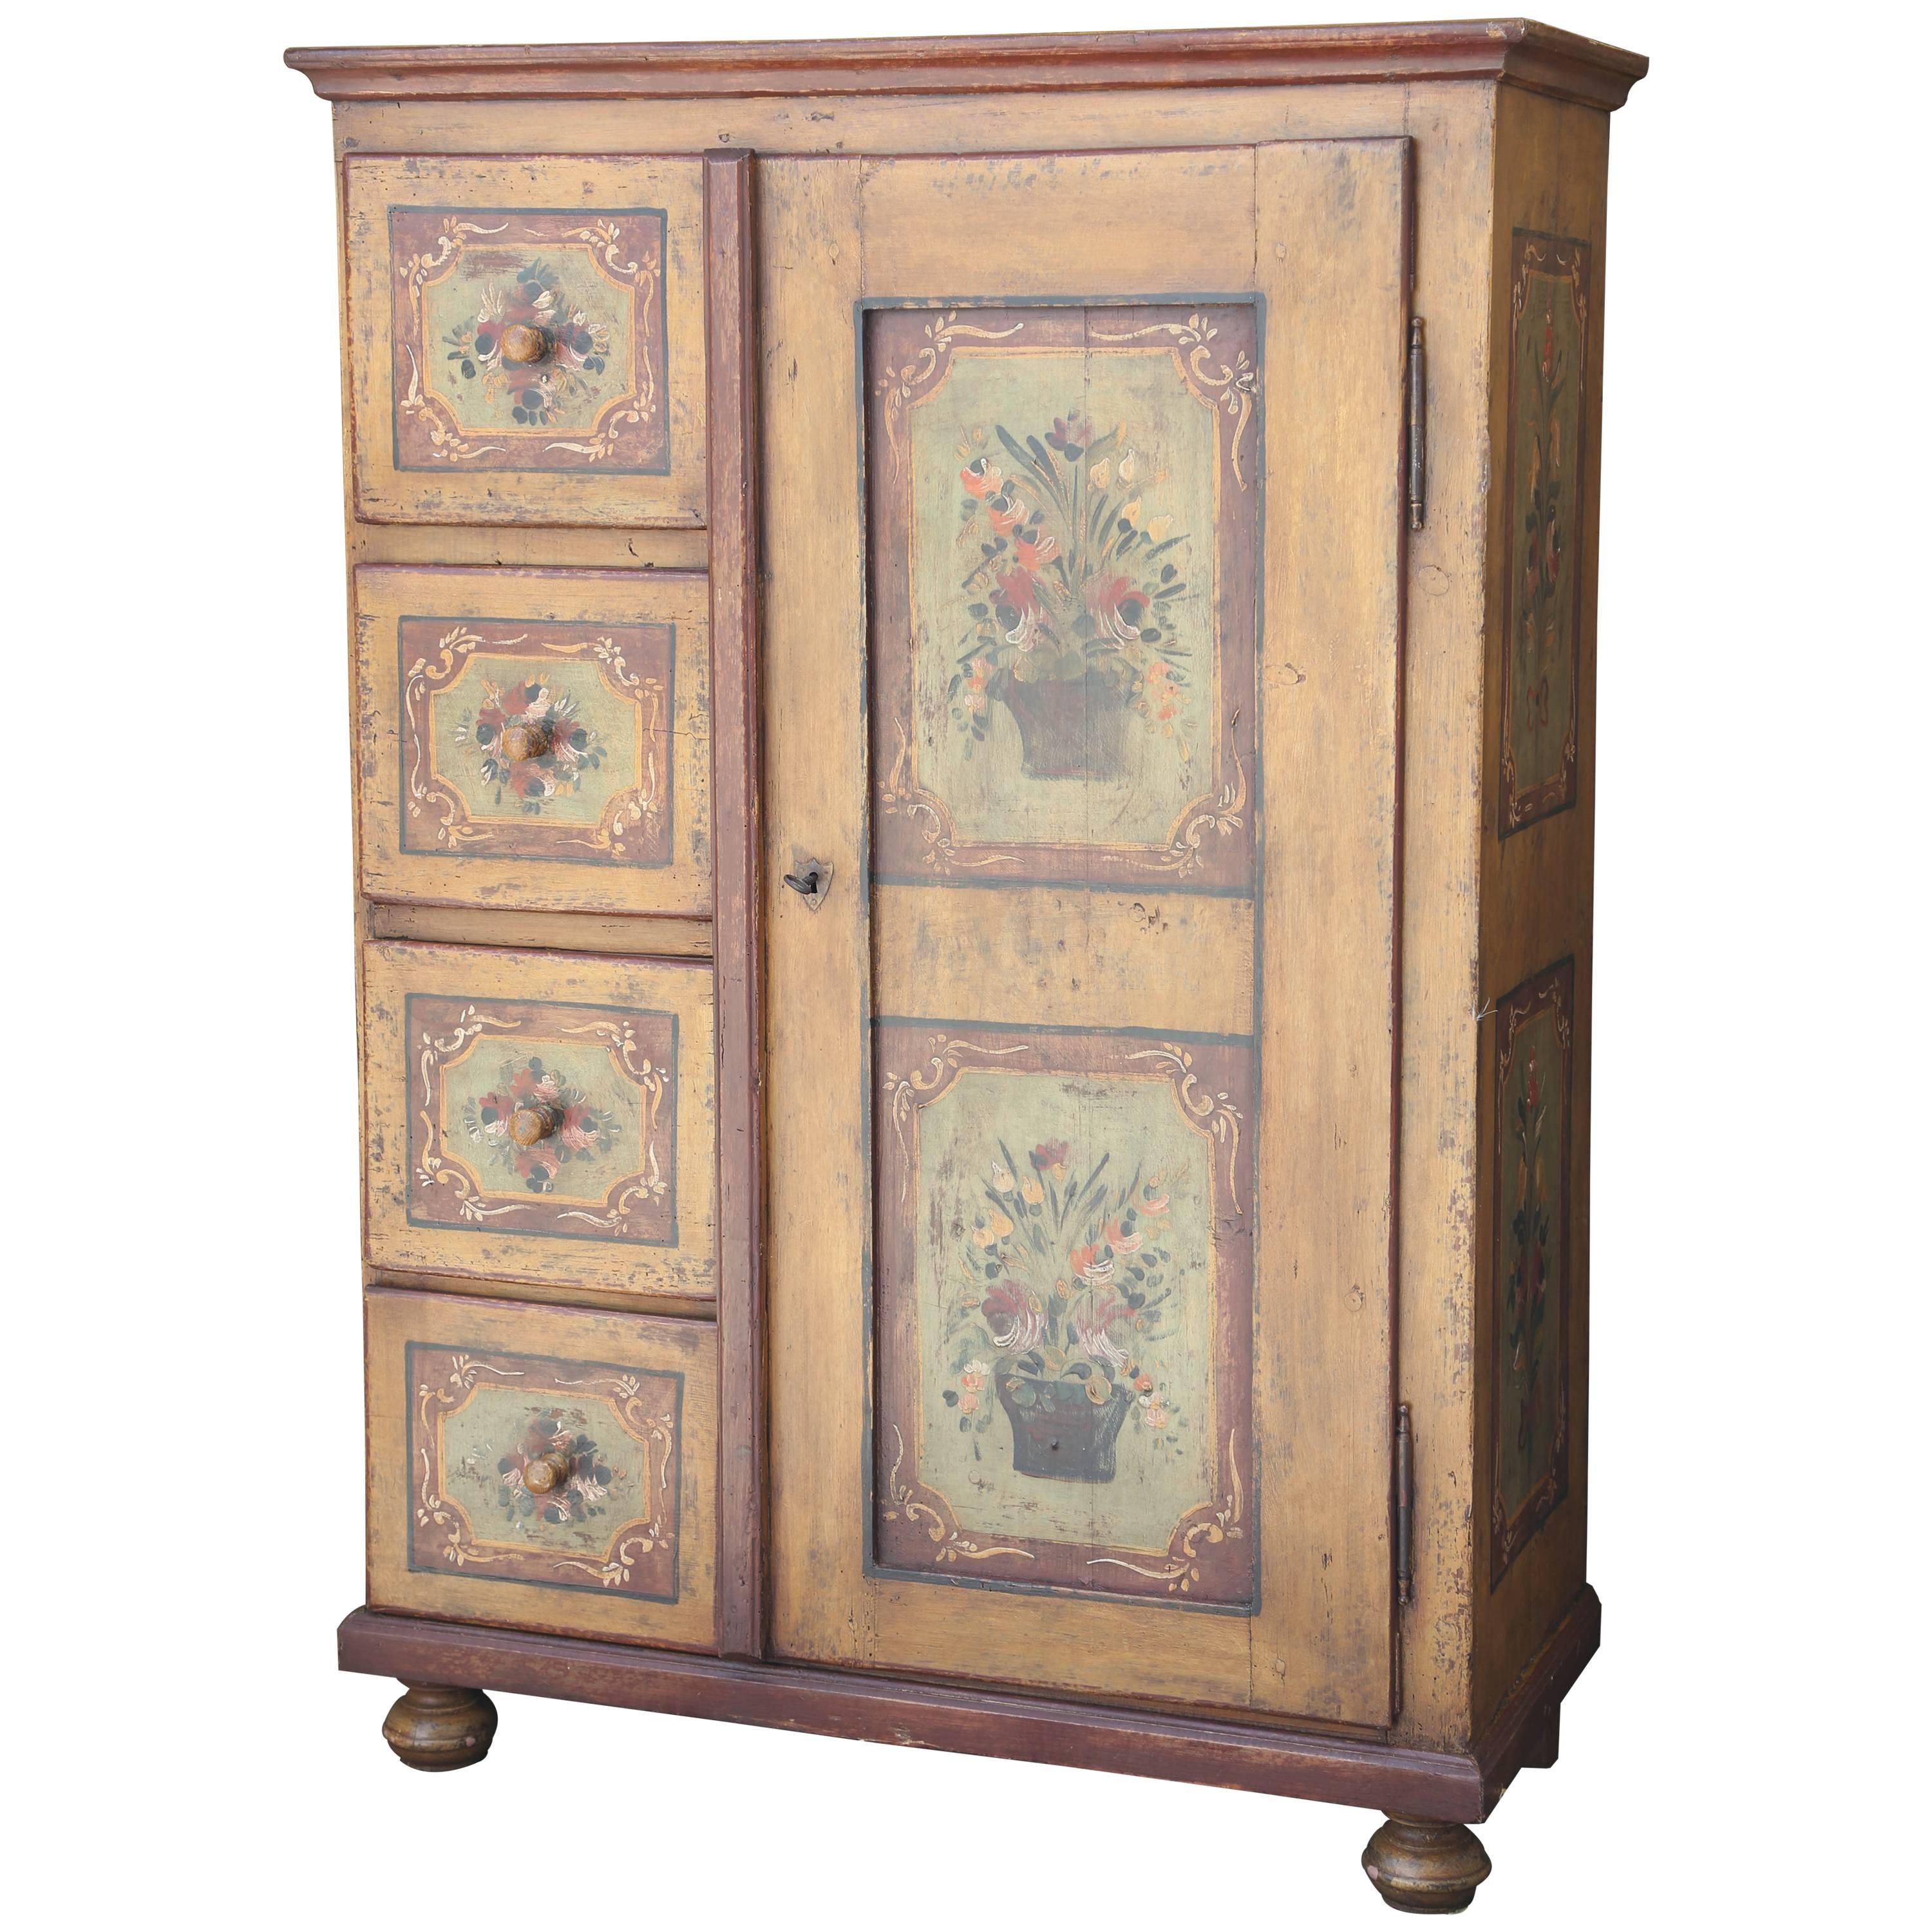 Superb 19th Century Hand-Painted Italian Armoire